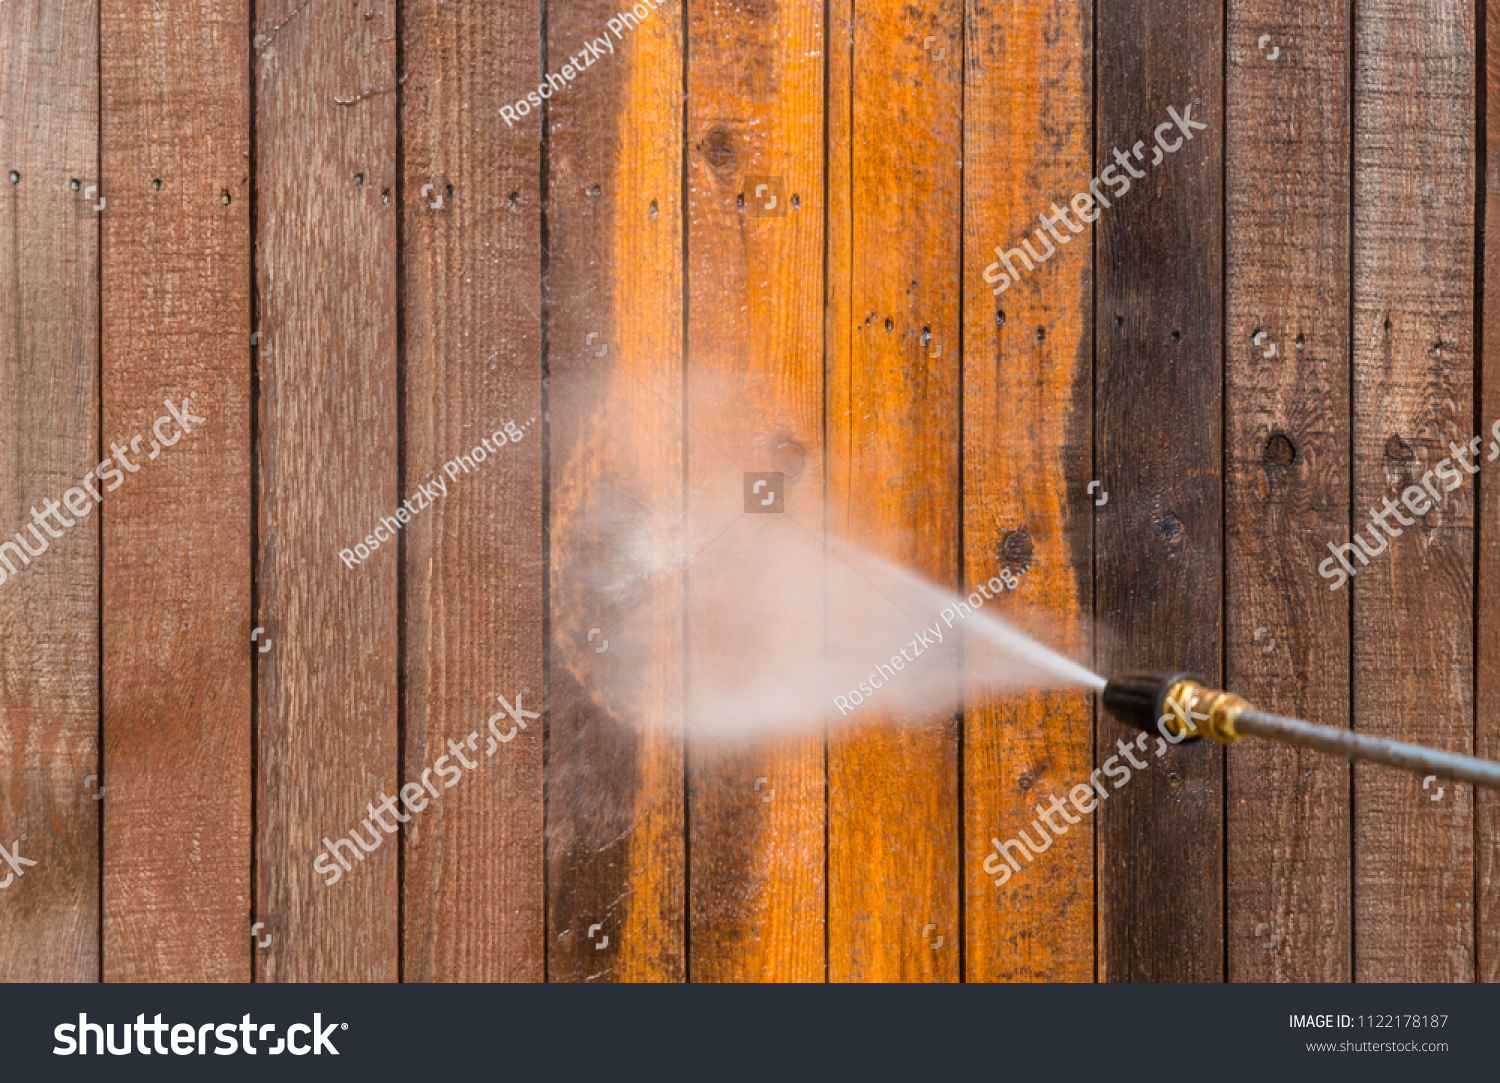 High pressure power washer spraying and cleaning wooden fence. Make old turn new. Dirty fence turned brand new again. Brown dirty grimy wood turned into golden oak again #1122178187